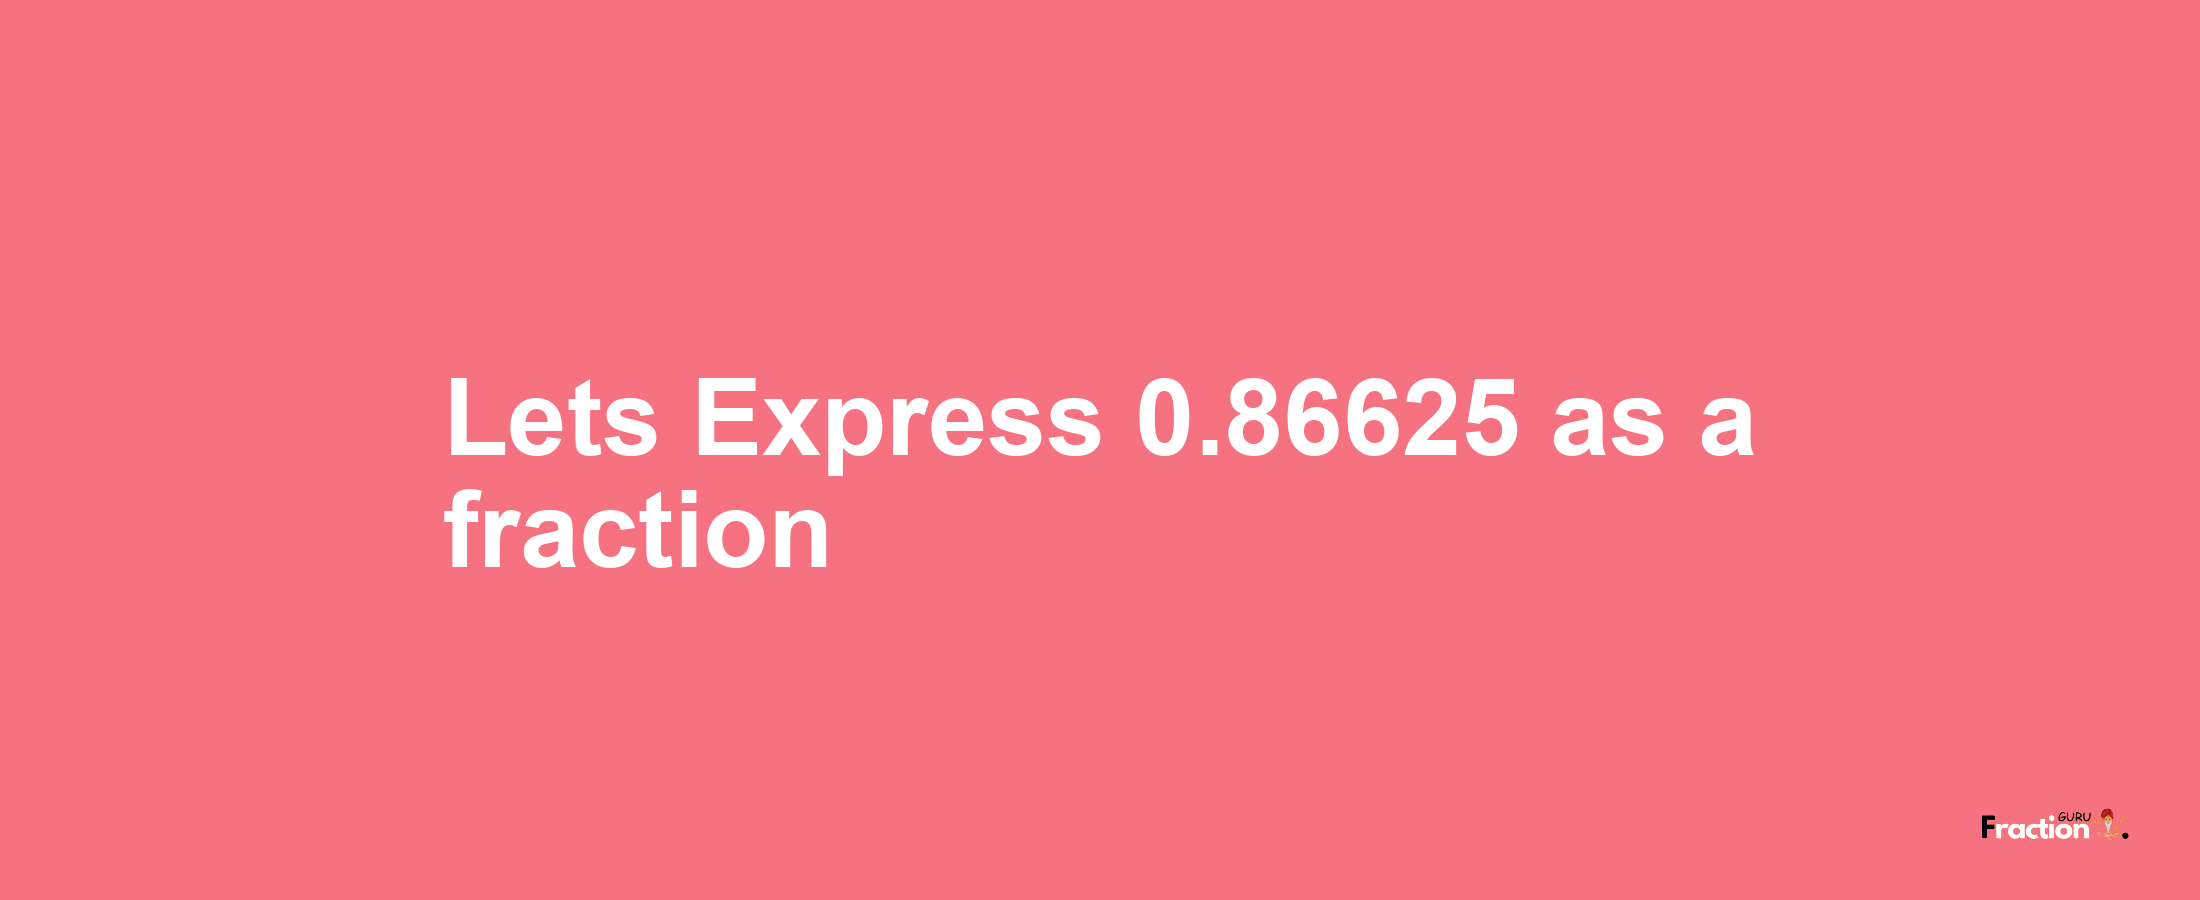 Lets Express 0.86625 as afraction